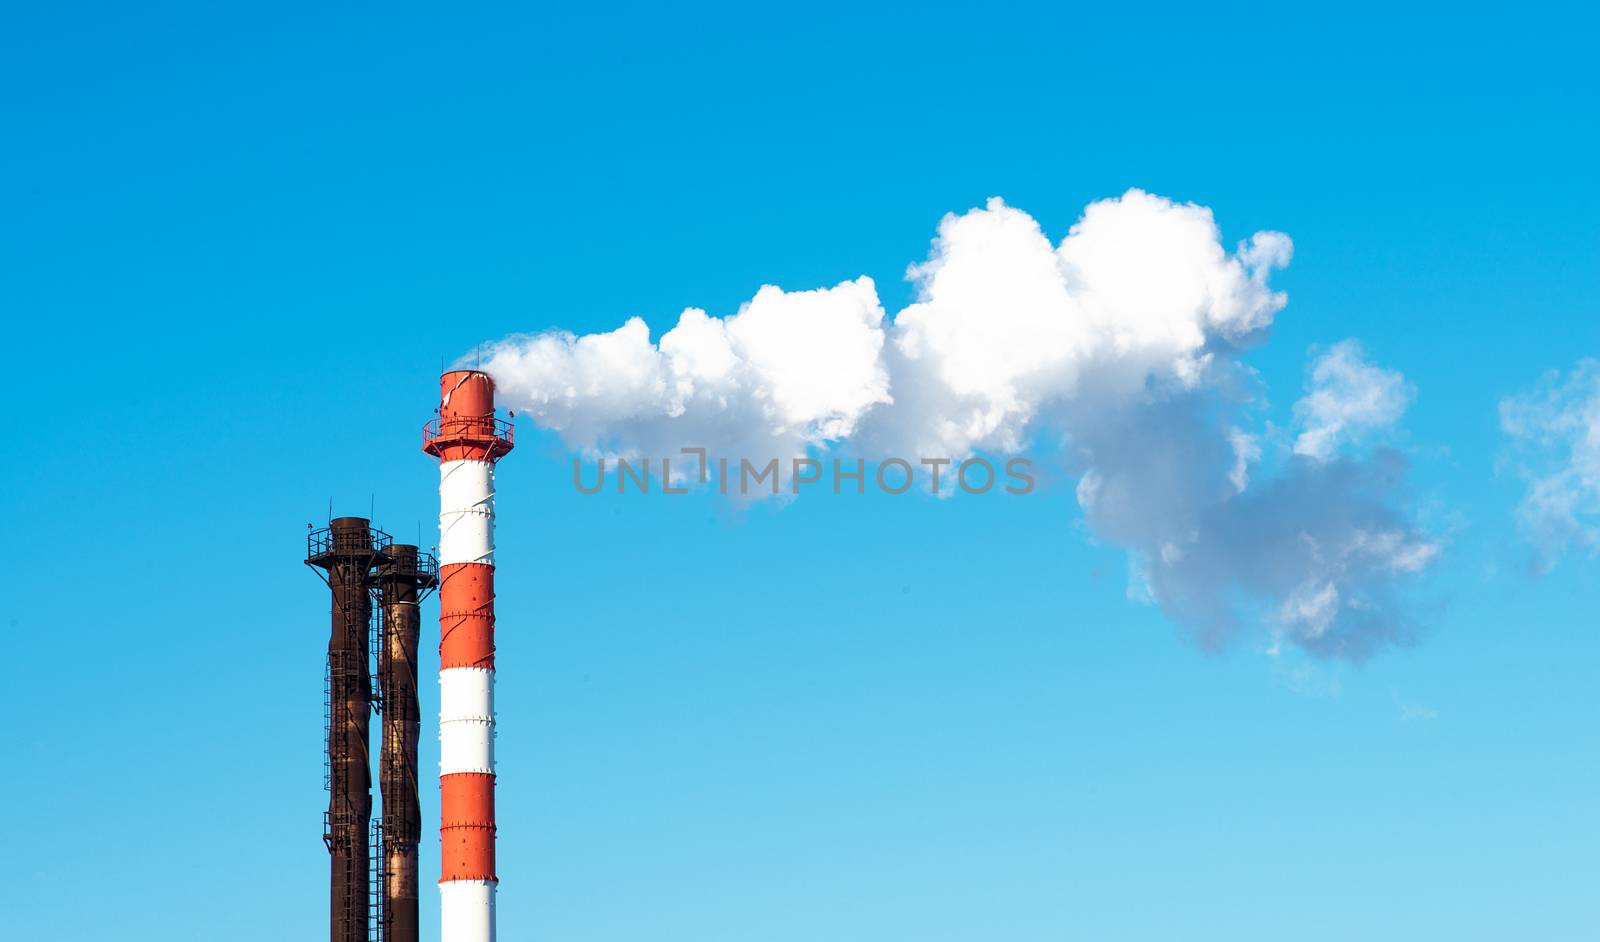  Atomic Power Station with blue sky and smoke